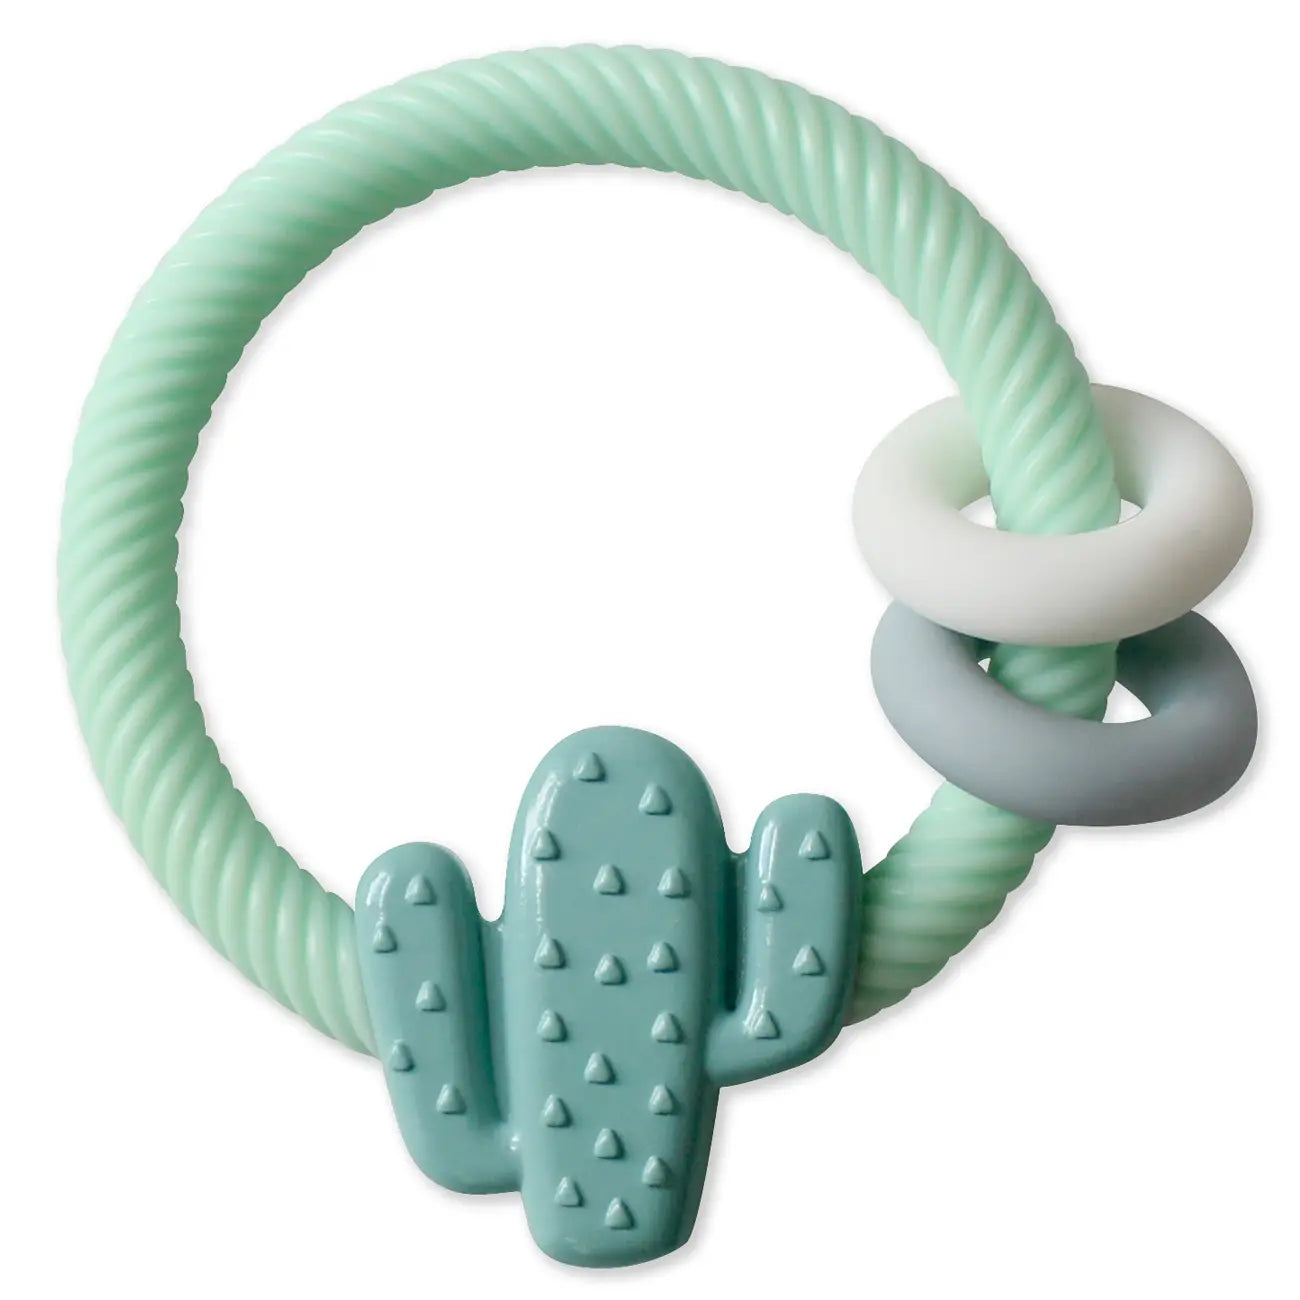 Ritzy Rattle Silicone Teether Rattles (Cactus)